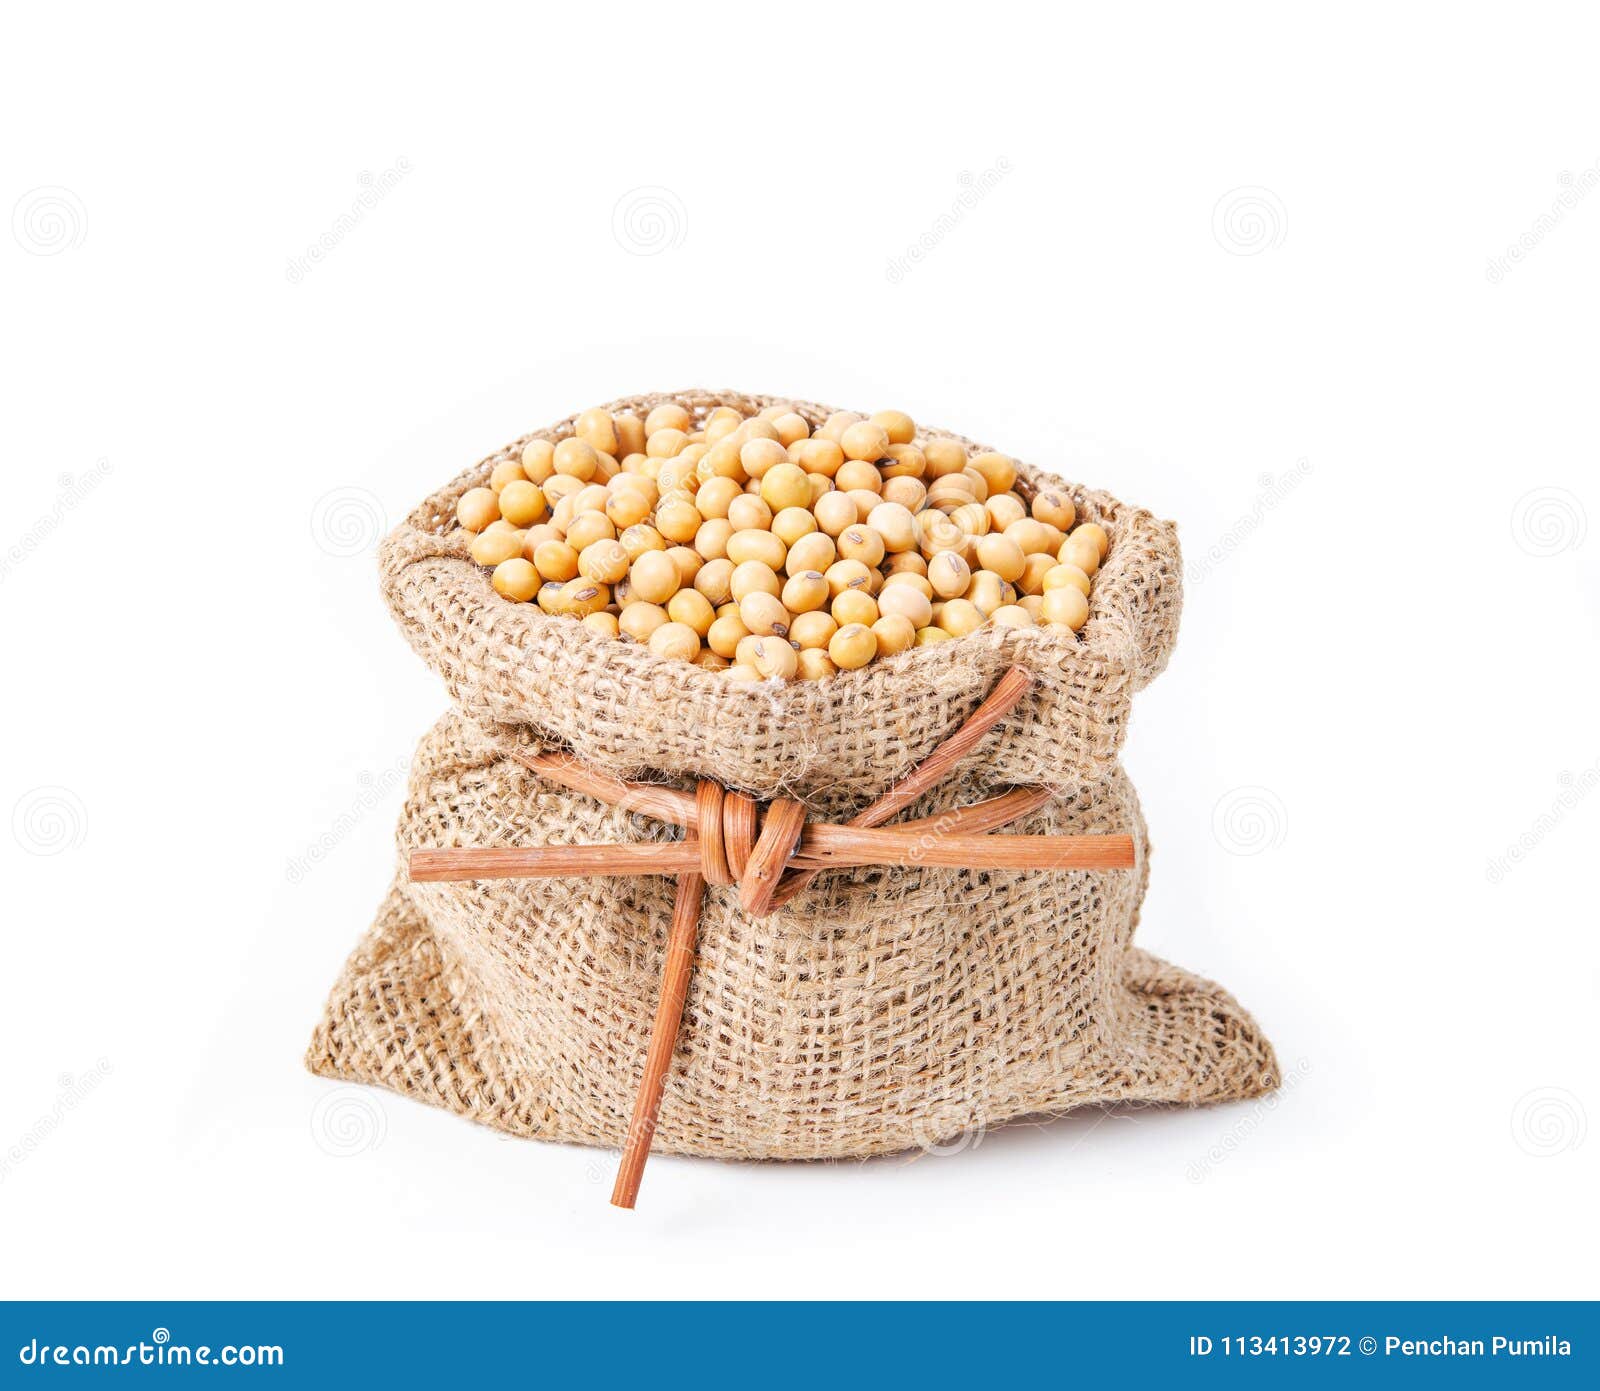 Dry Soy Beans Bag Stock Photo by ©PixHound 421359216